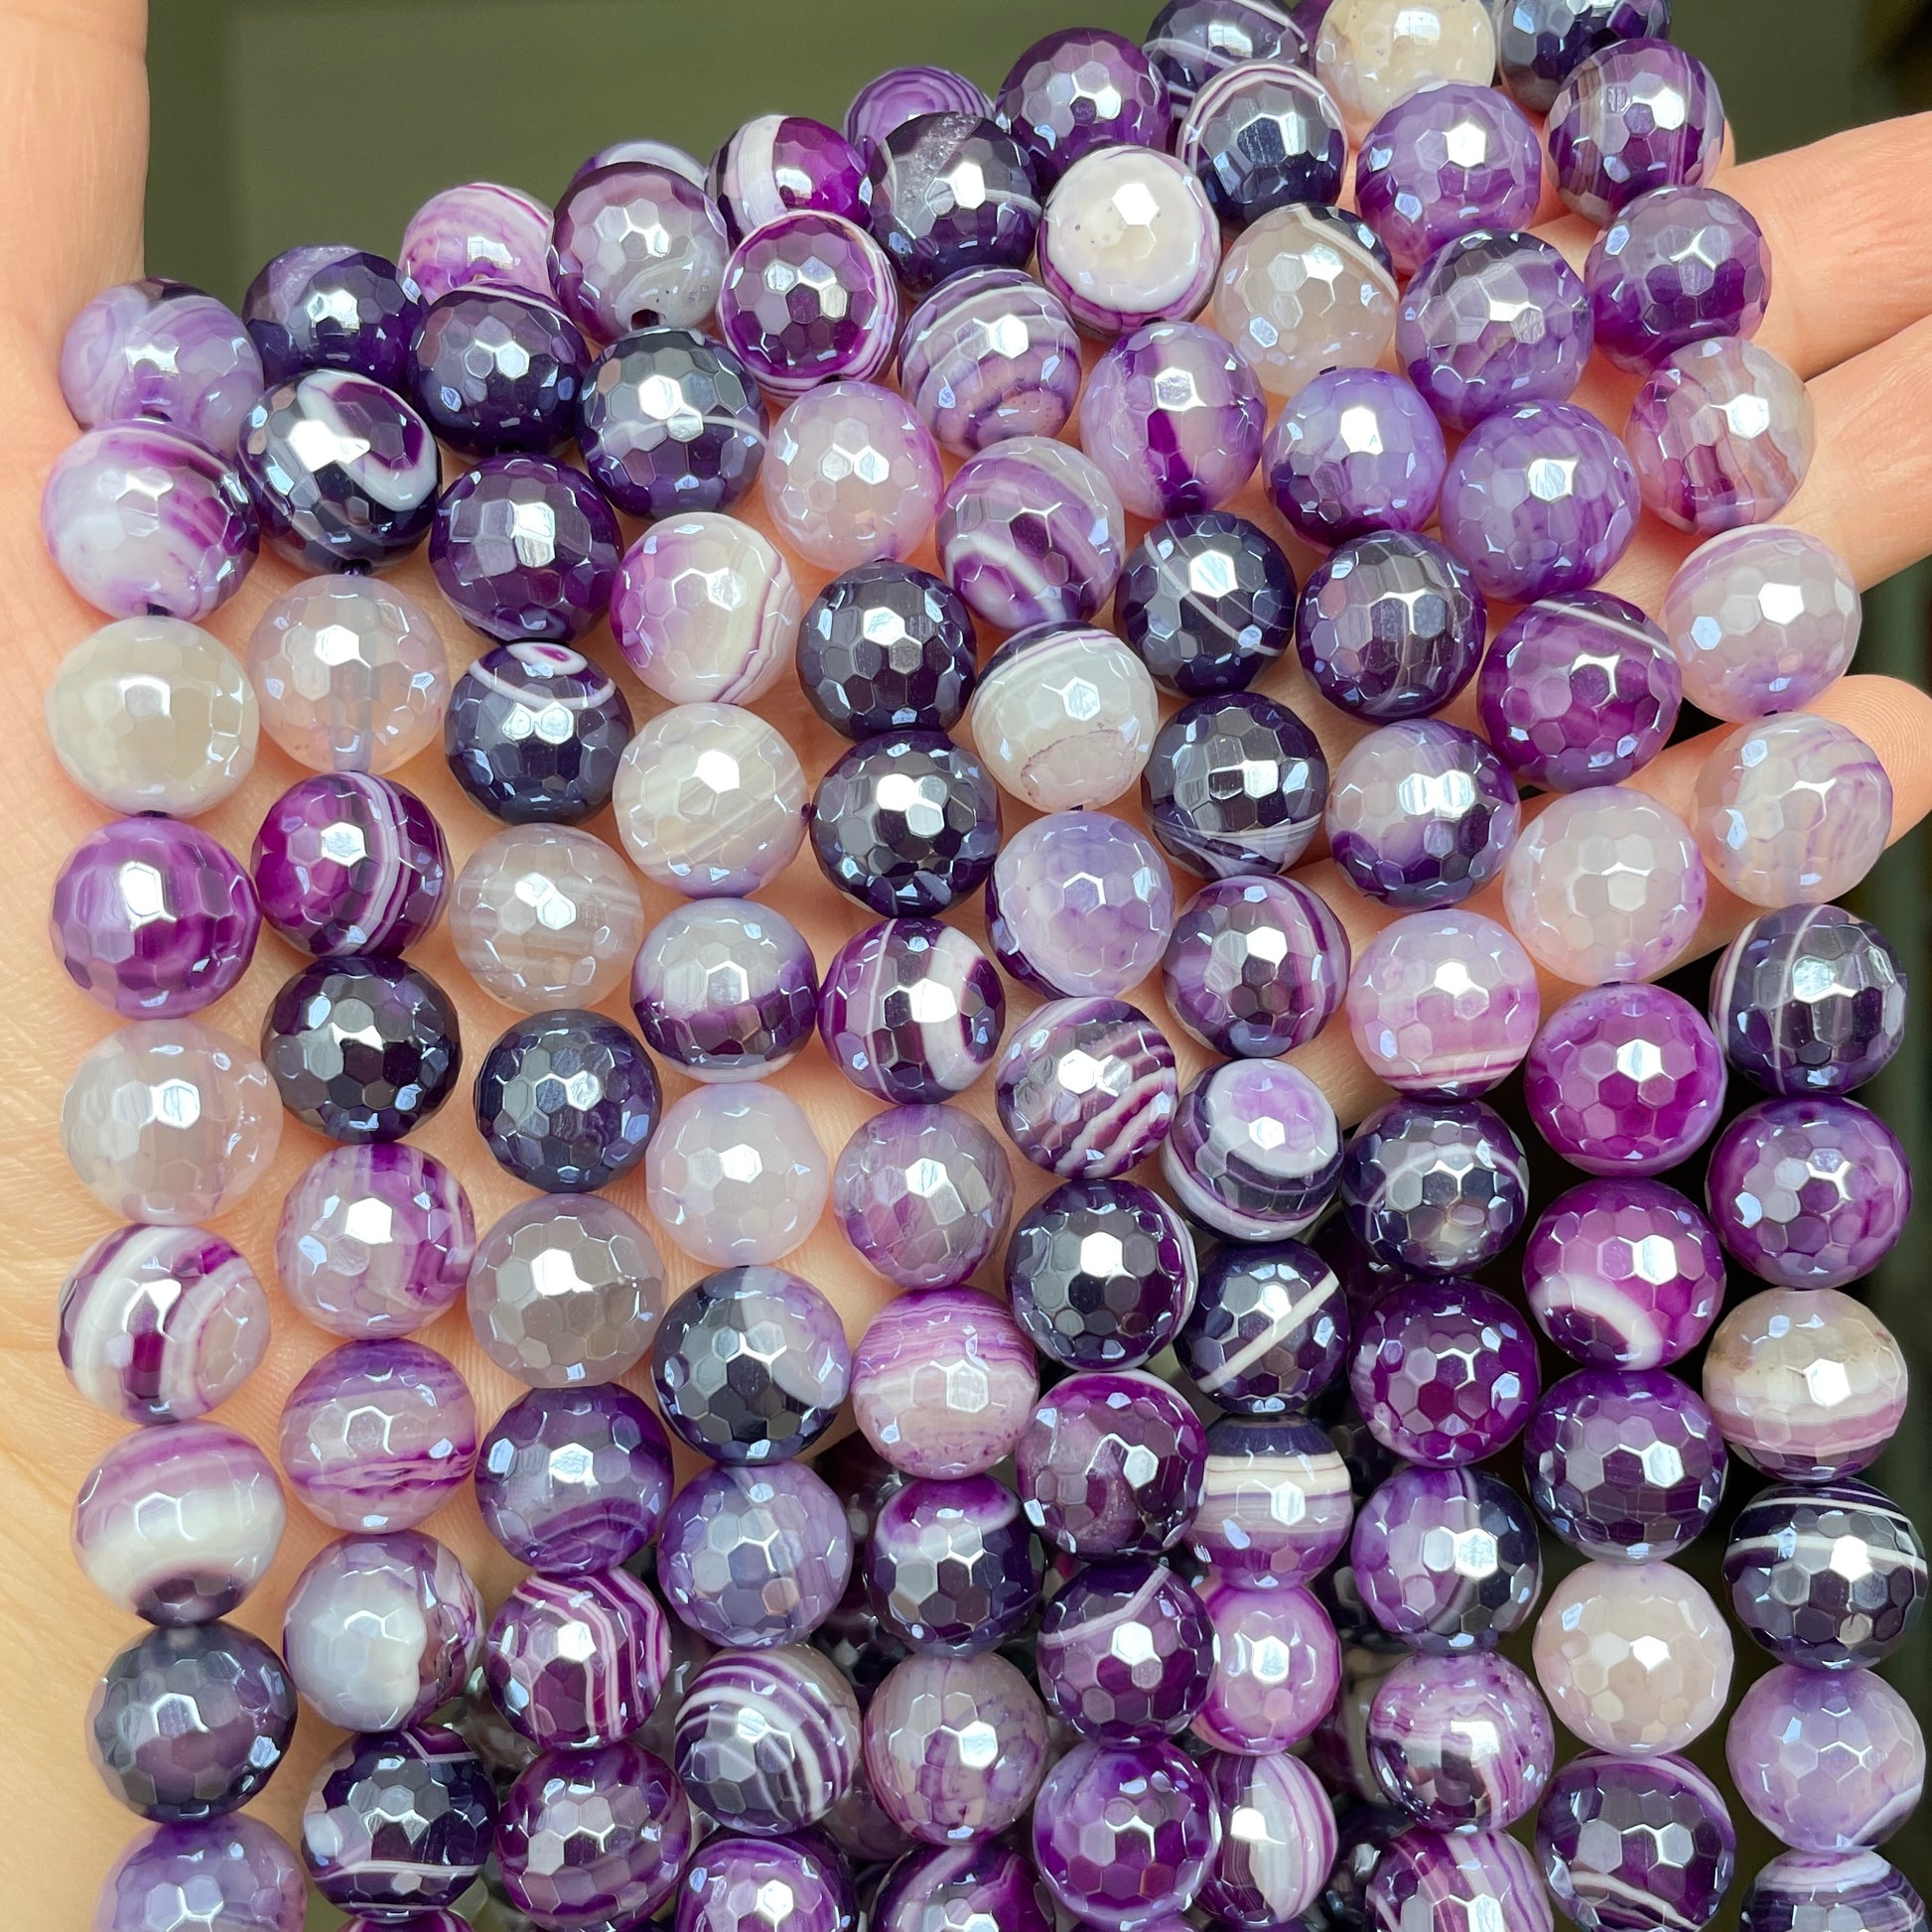 10, 12mm Electroplated Purple Banded Agate Stone Faceted Beads-Grade A Premium Quality Electroplated Beads 12mm Stone Beads New Beads Arrivals Premium Quality Agate Beads Charms Beads Beyond